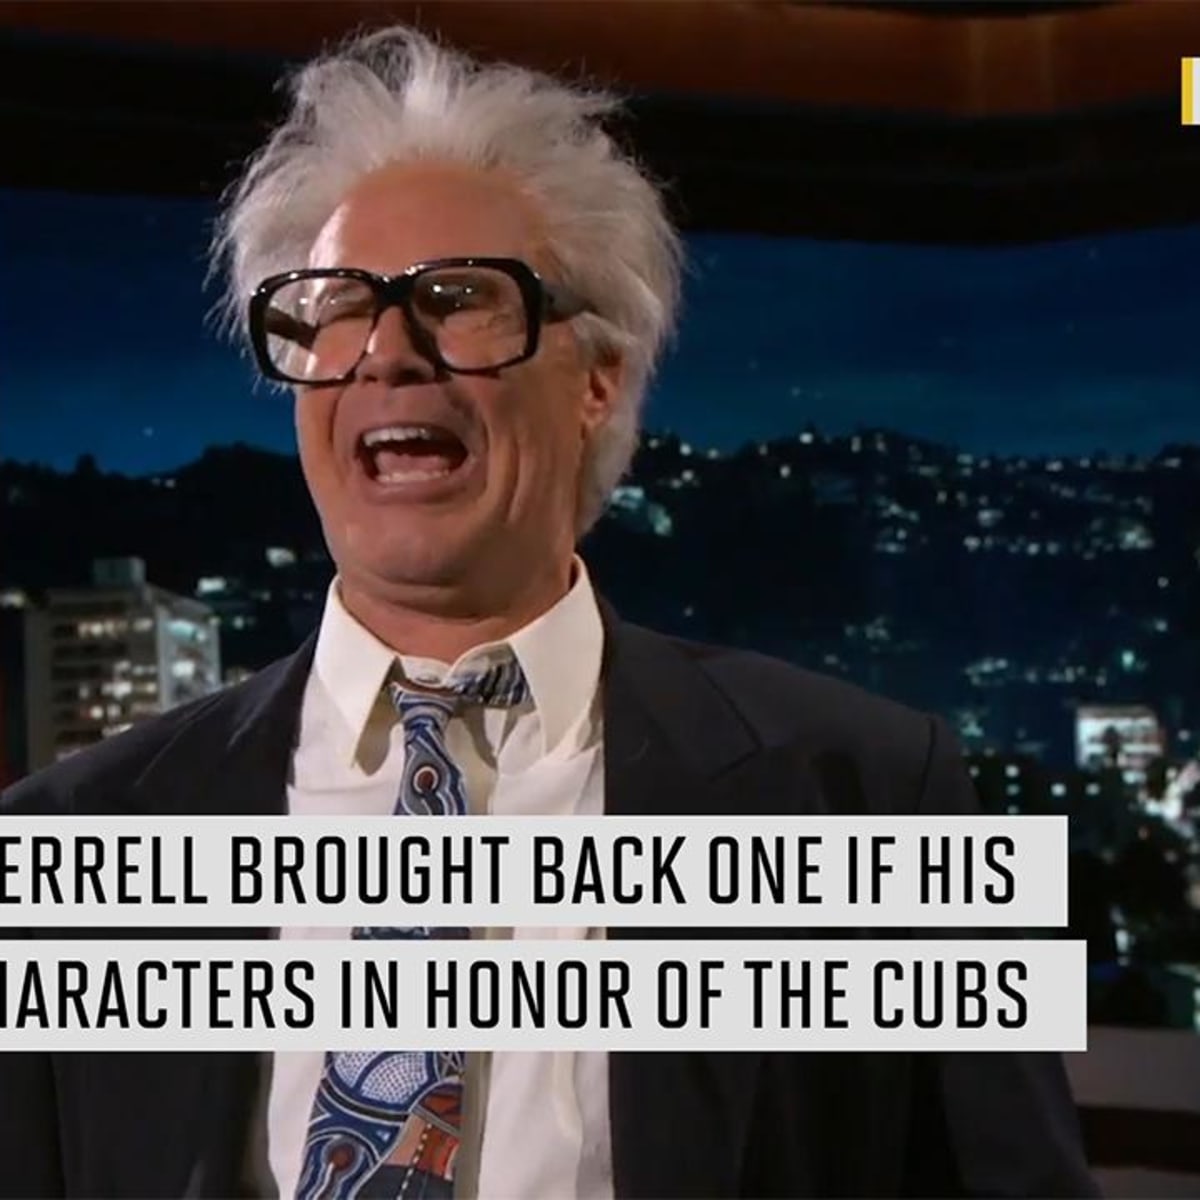 Will Ferrell's Harry Caray impression back for Cubs - Sports